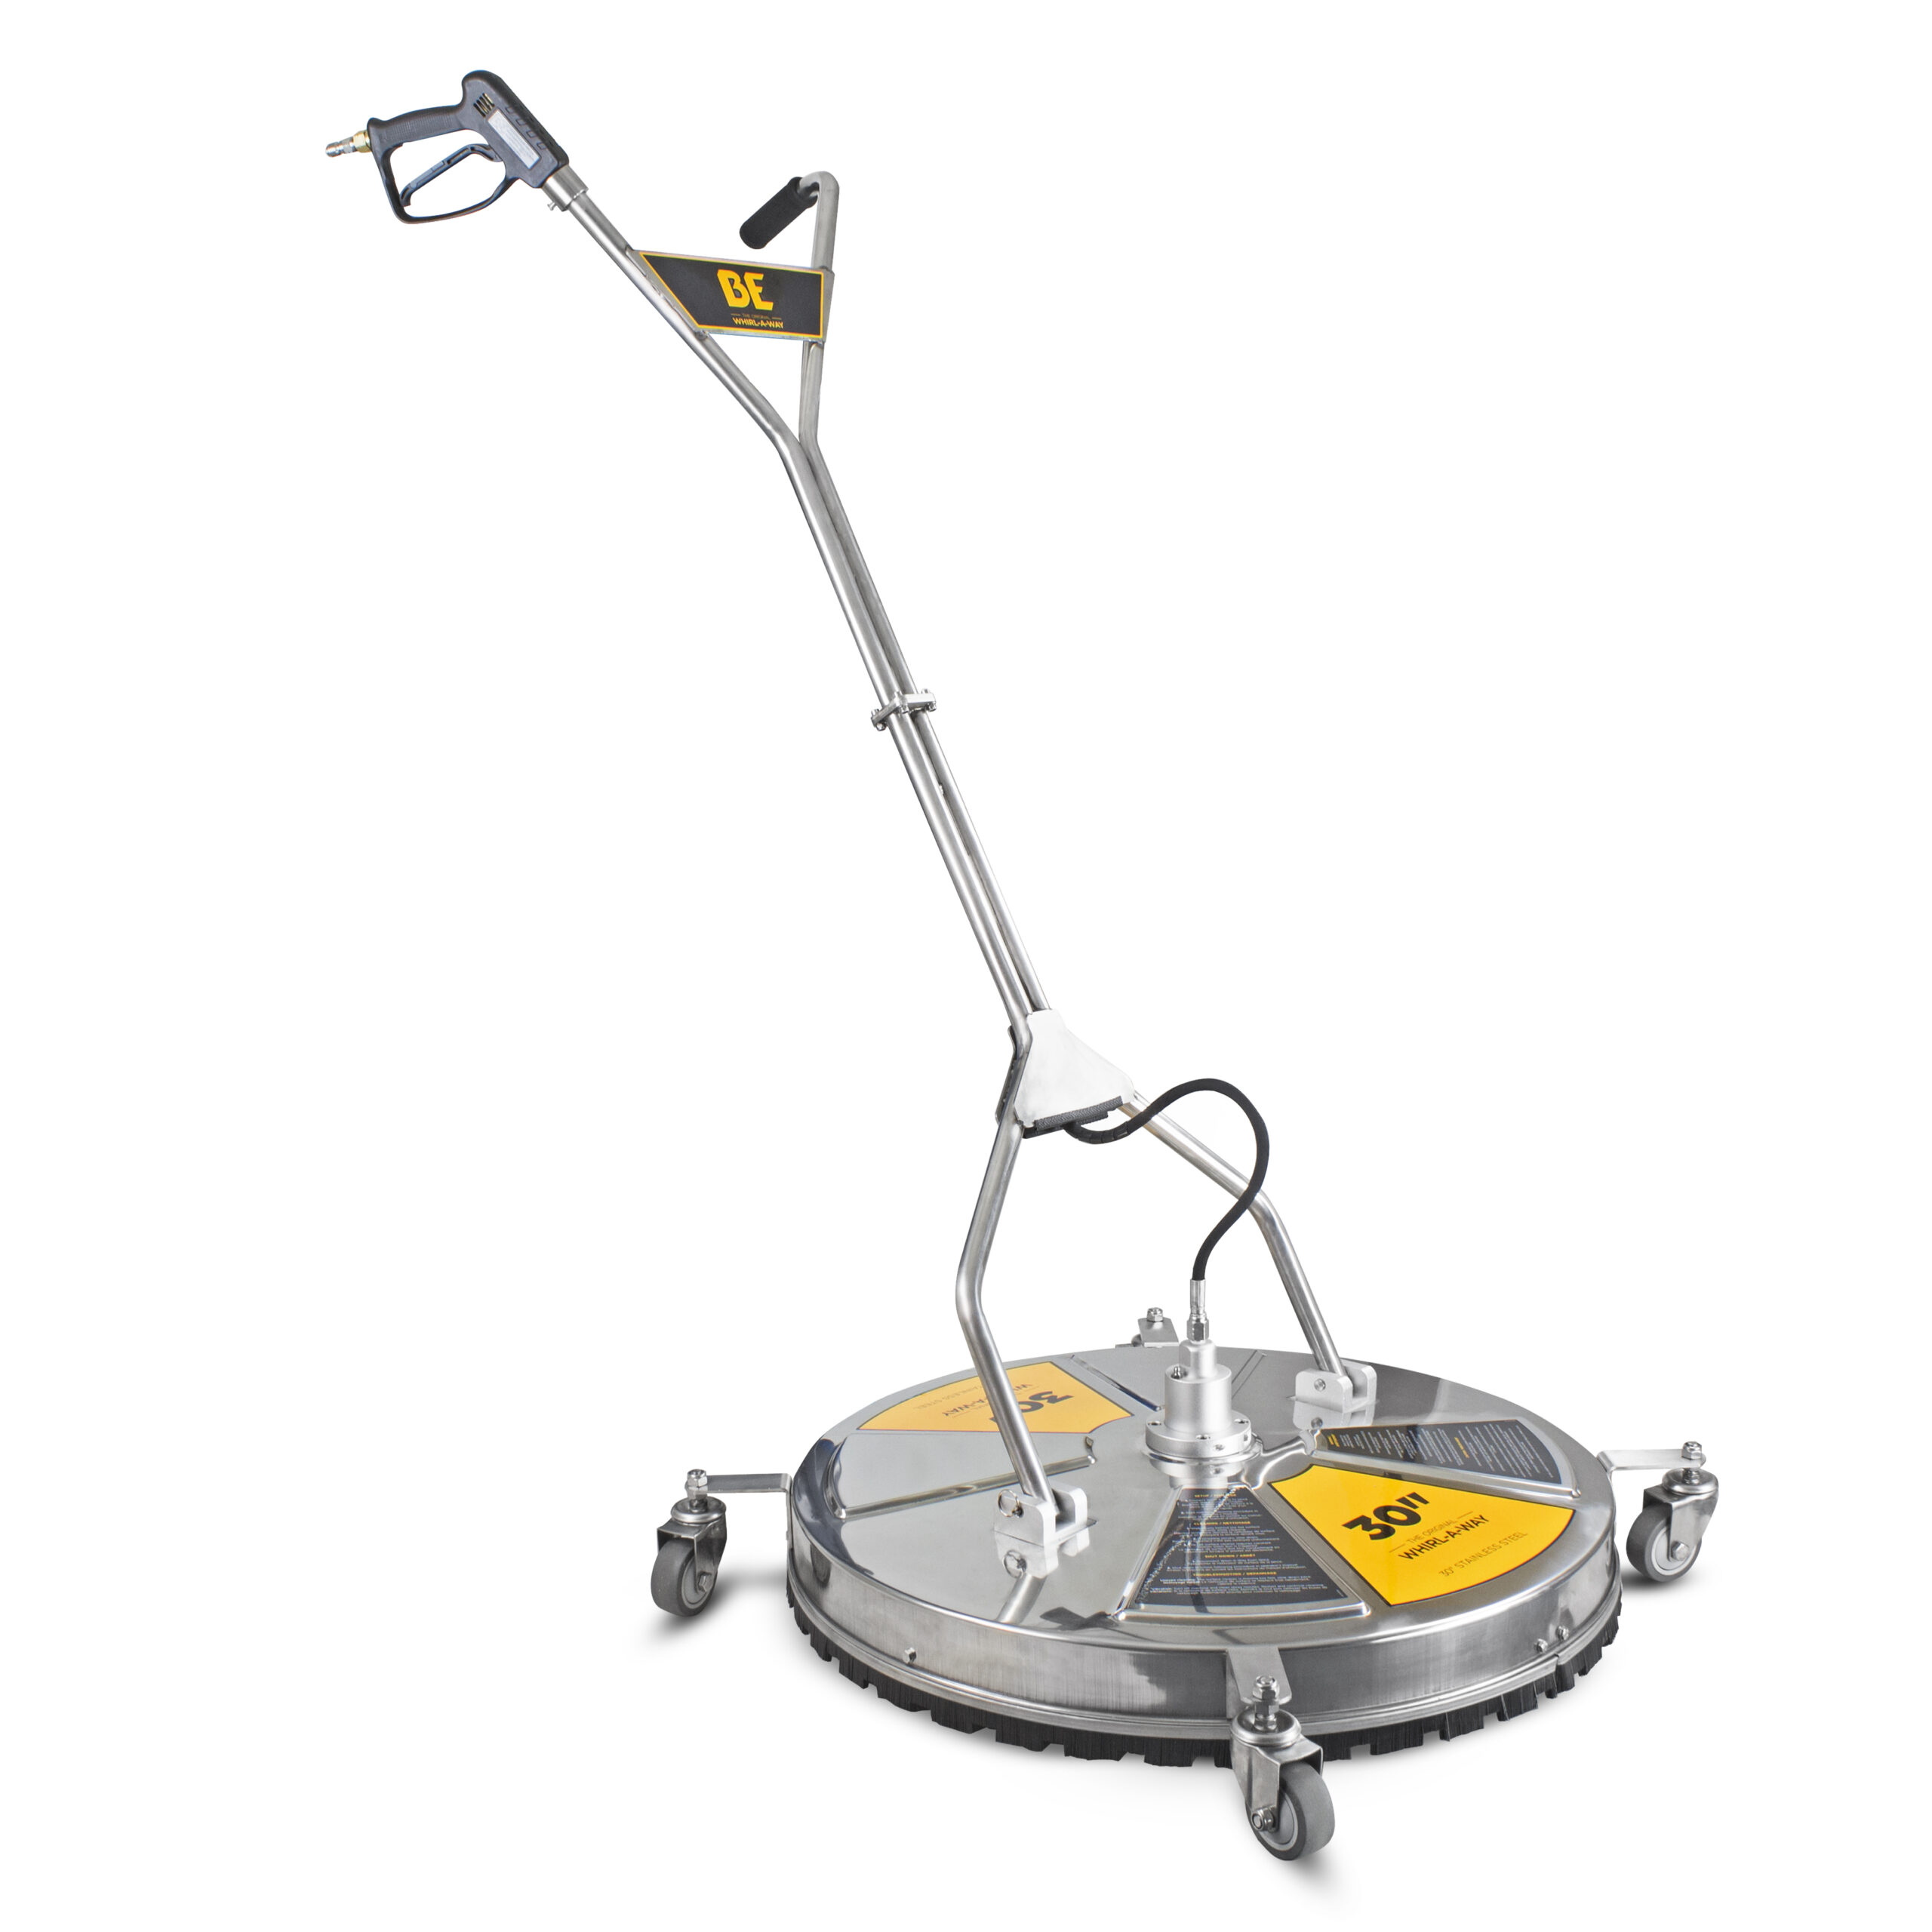 UK Suppliers BE Pressure 30? Stainless Steel Whirlaway - 5000PSI Flat Surface Cleaner With Castors